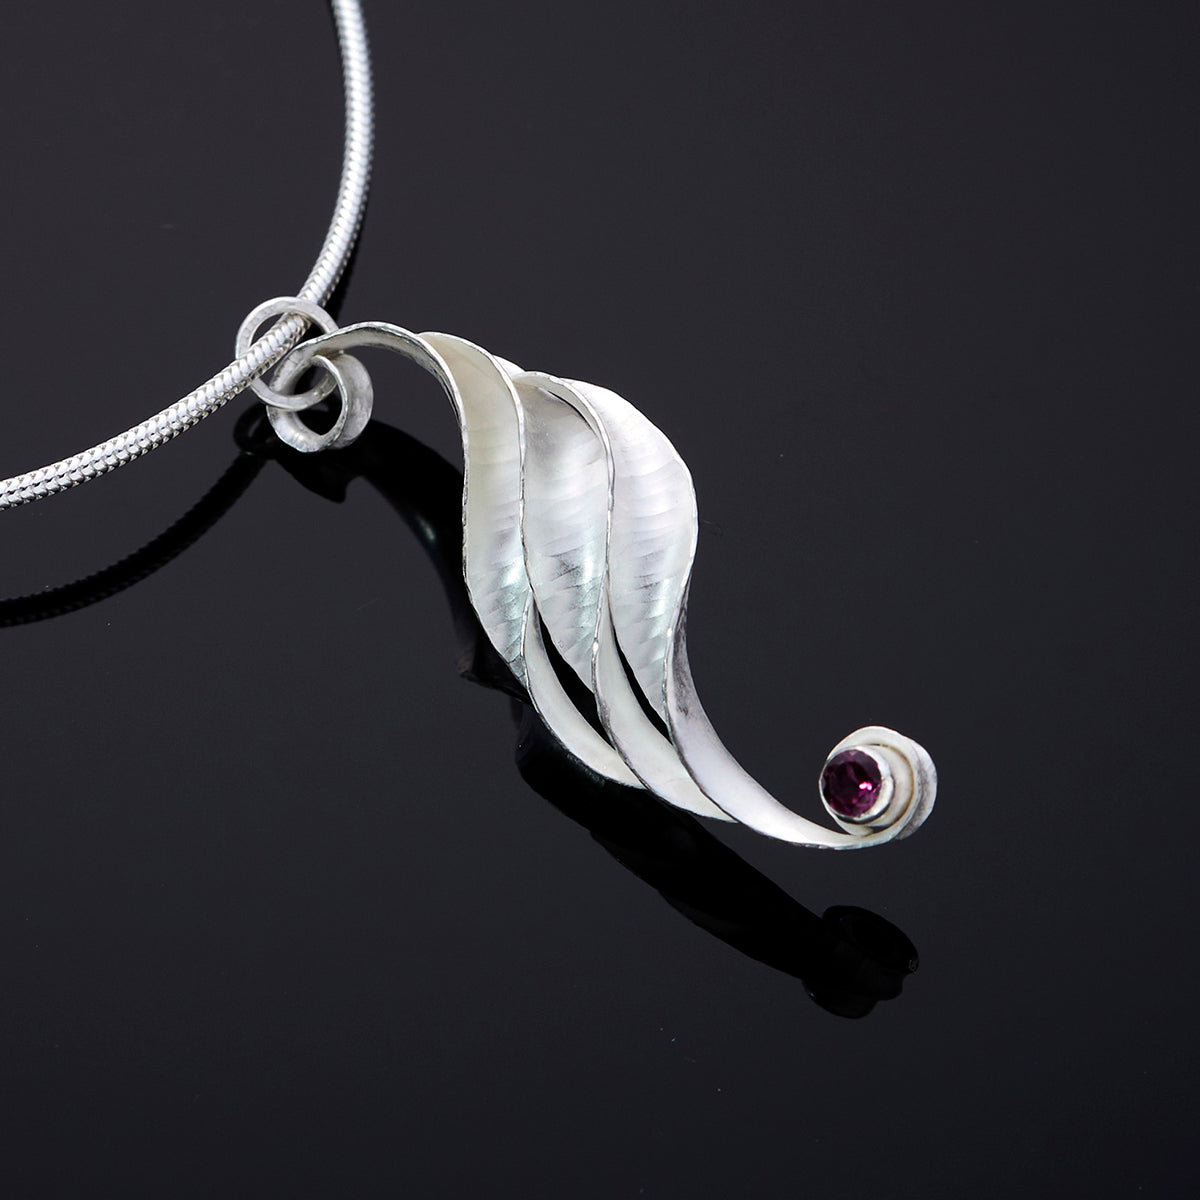 A silver wave necklace, handmade, composed of three curled and twisted units, the top one ending in a loop for the chain and the bottom one curled around a 3mm rhodolite garnet, faceted, magenta. The three units are arranged so that they form a progression.